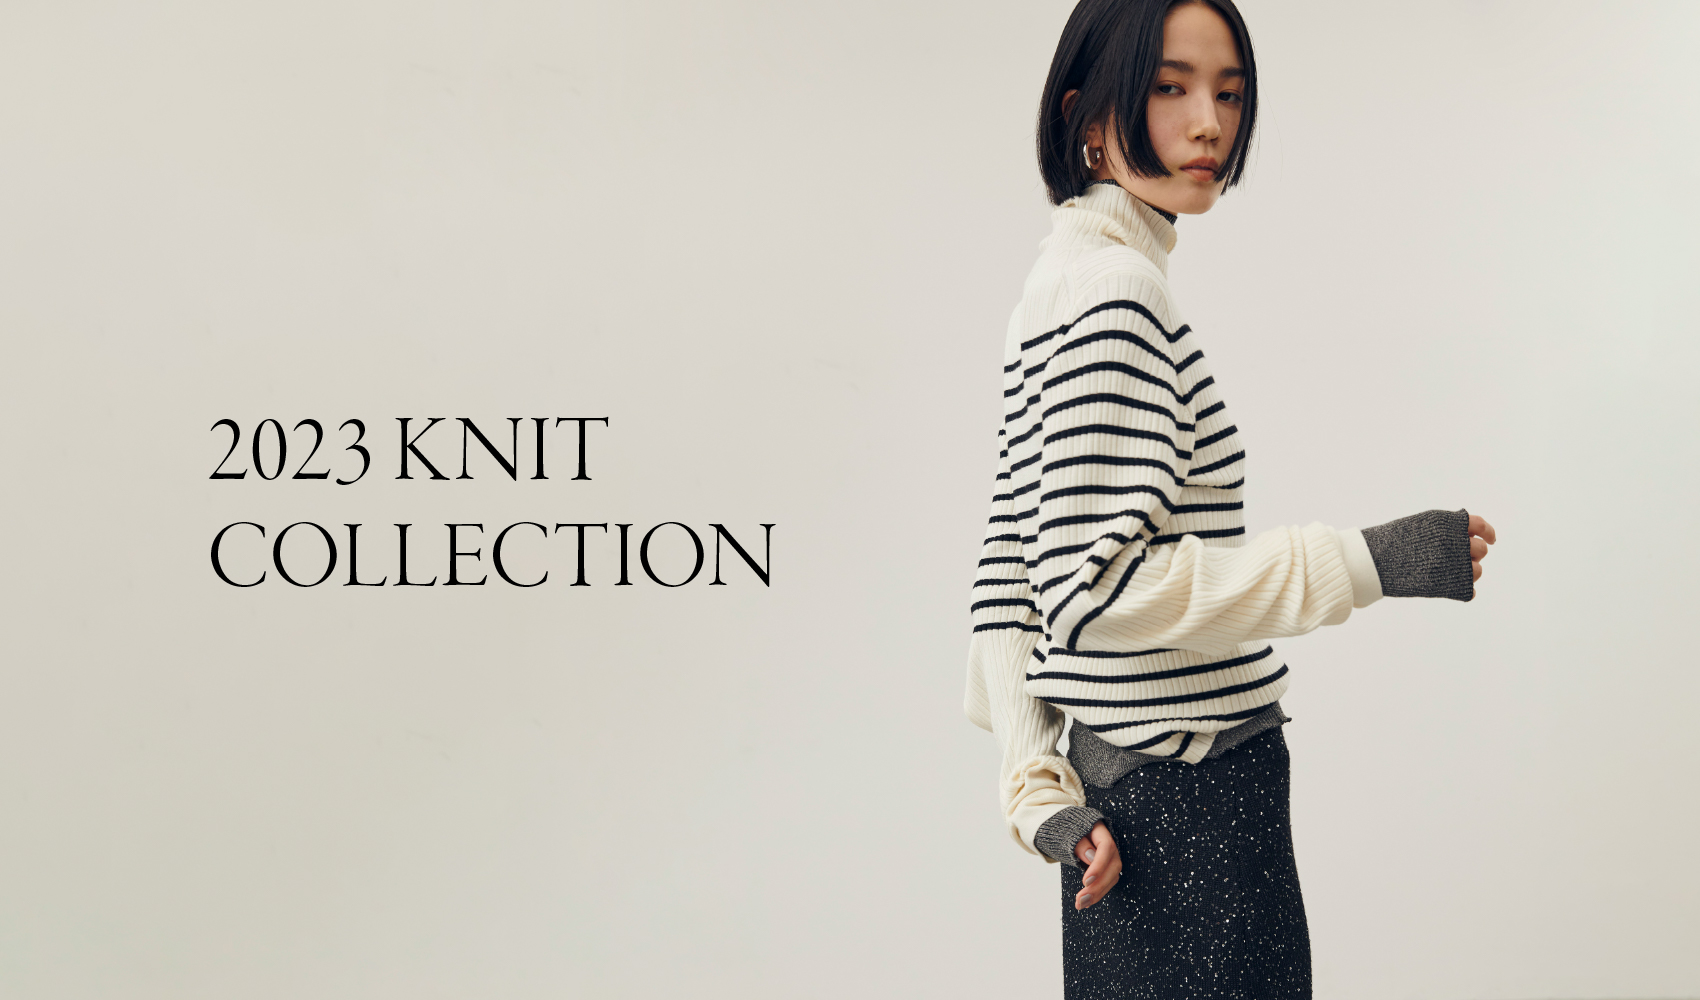 2023 KNIT COLLECTION